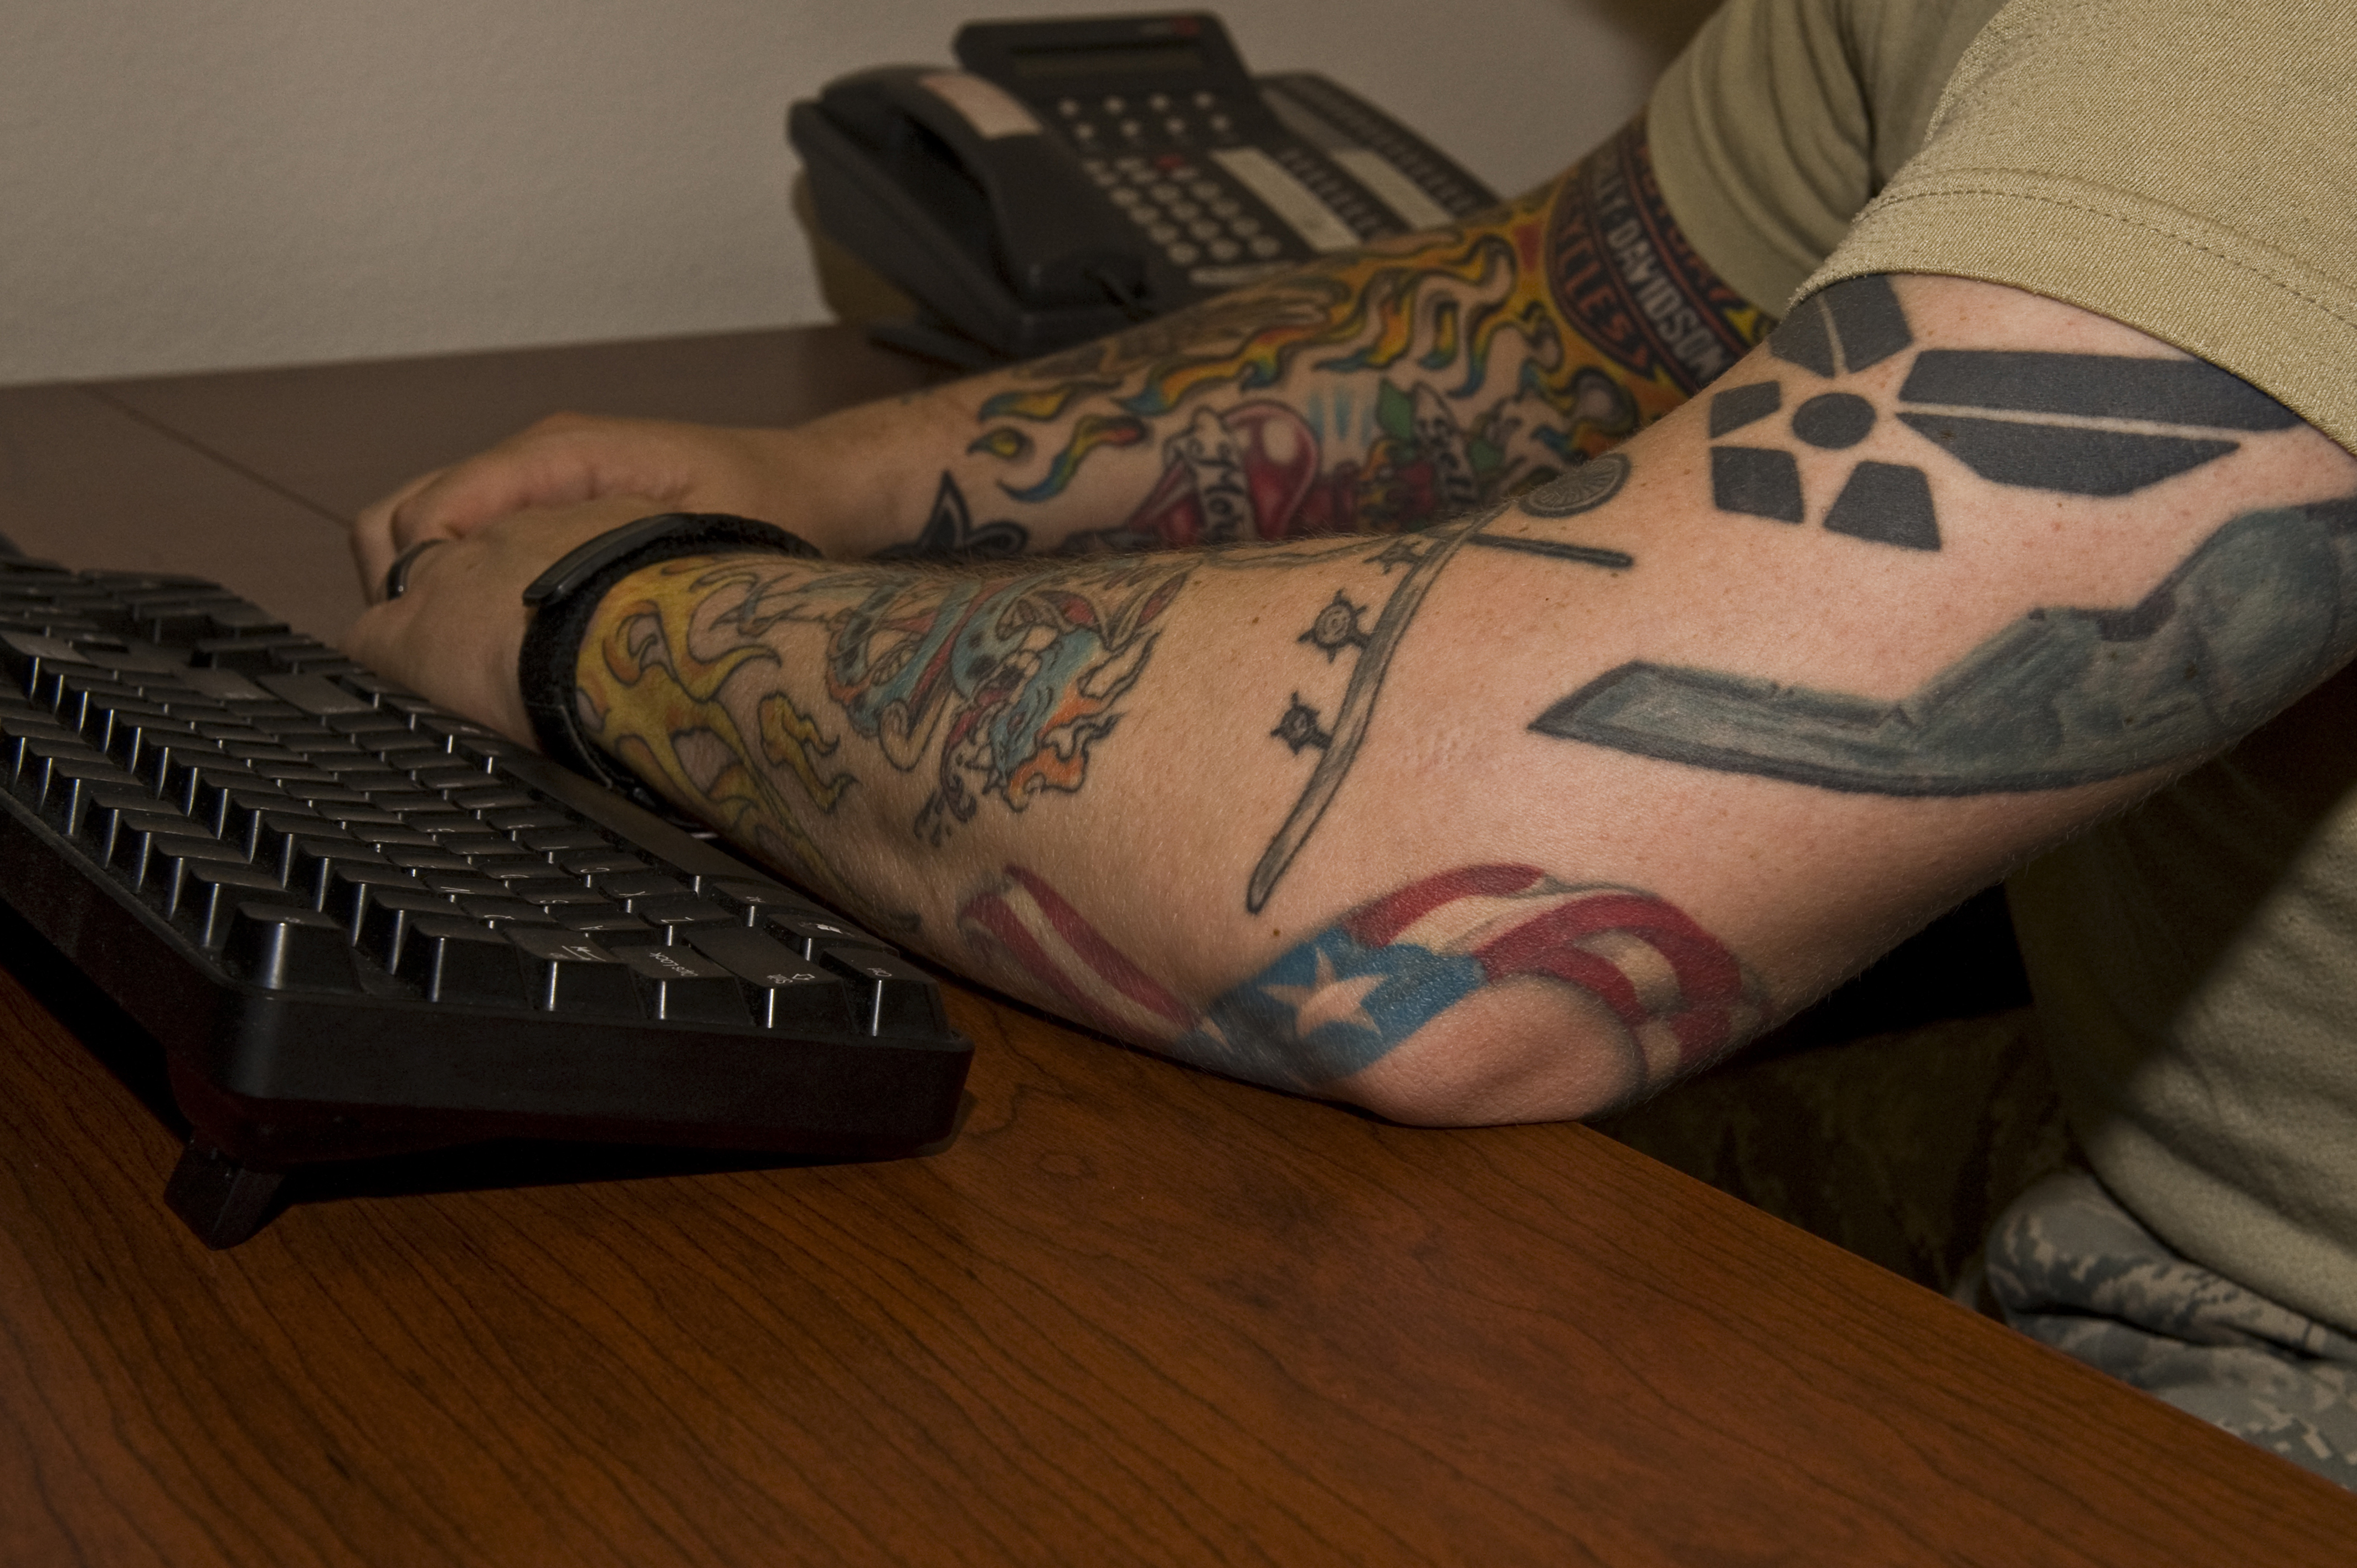 Army Relaxes Tattoo Rules as It Scrambles for New Recruits  Militarycom